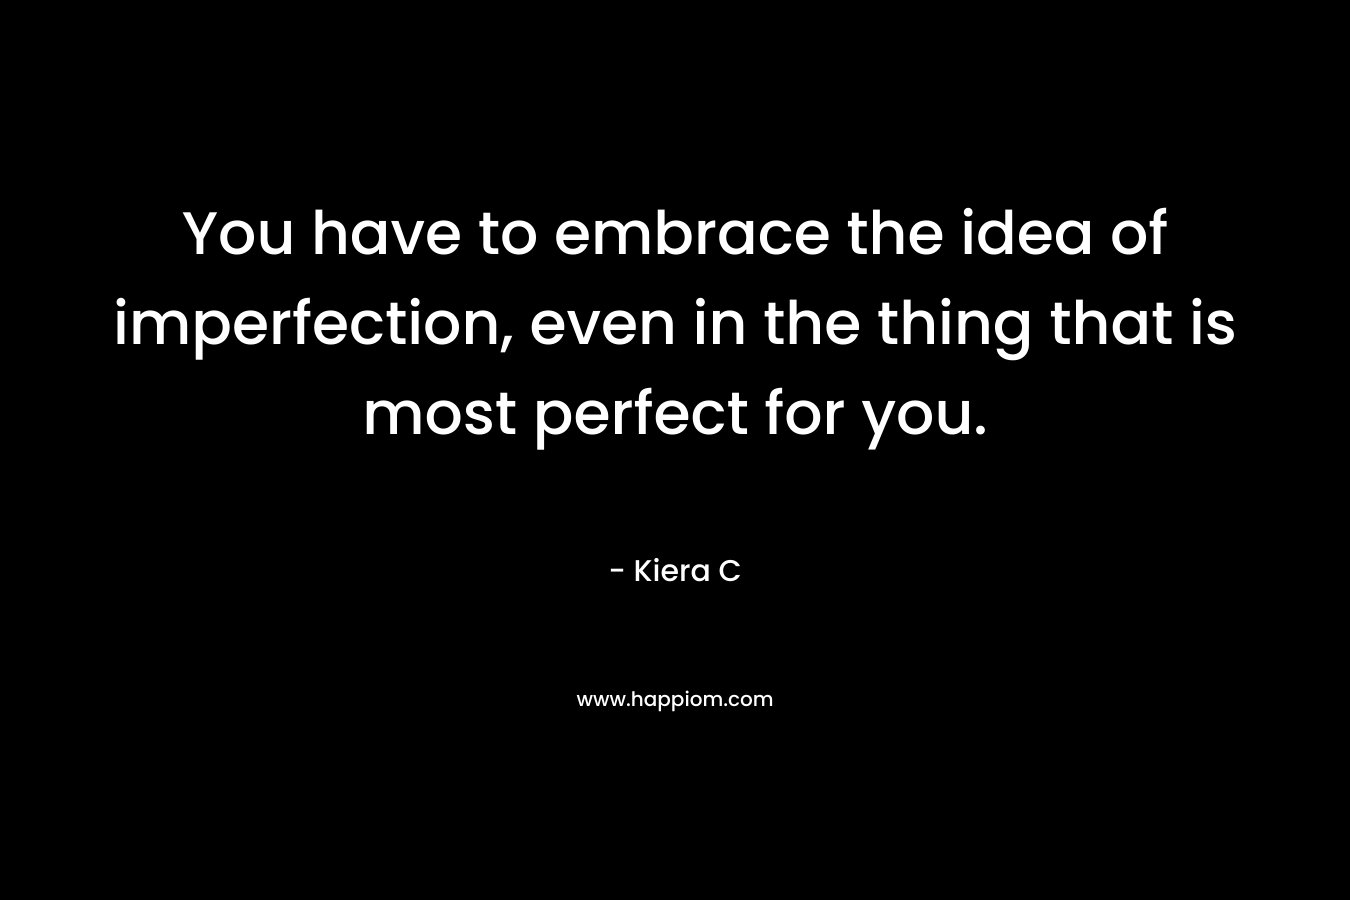 You have to embrace the idea of imperfection, even in the thing that is most perfect for you. – Kiera C